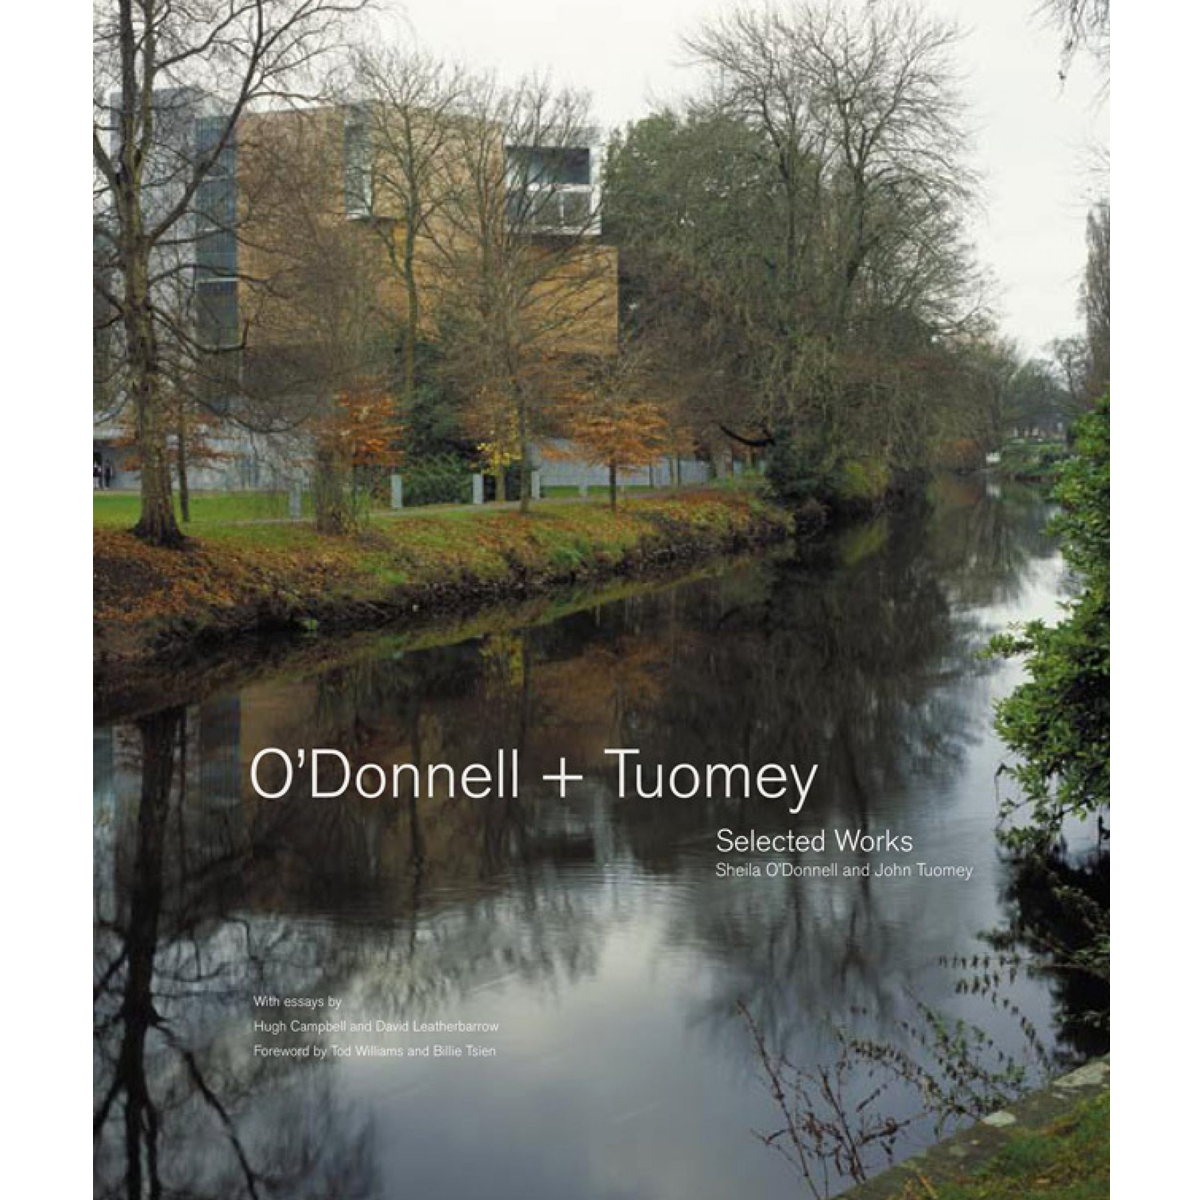 O’Donnell & Tuomey